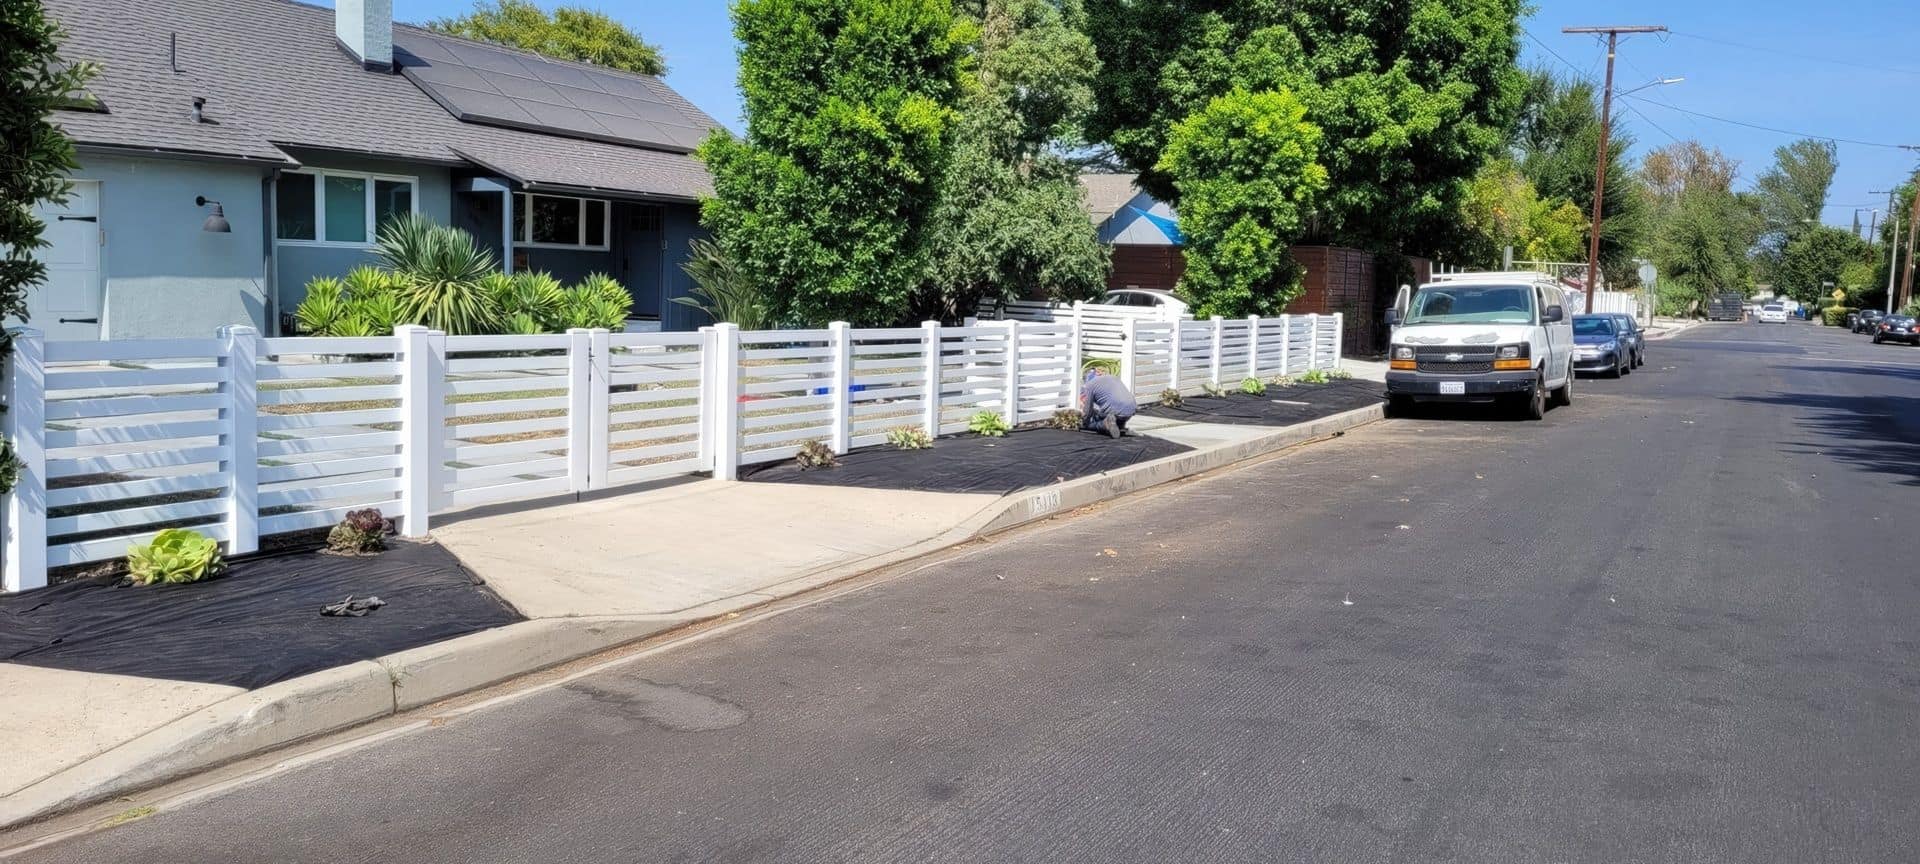 Suburban home with vinyl horizontal picket fence, concrete sidewalk, lush lawn & trees in the background.